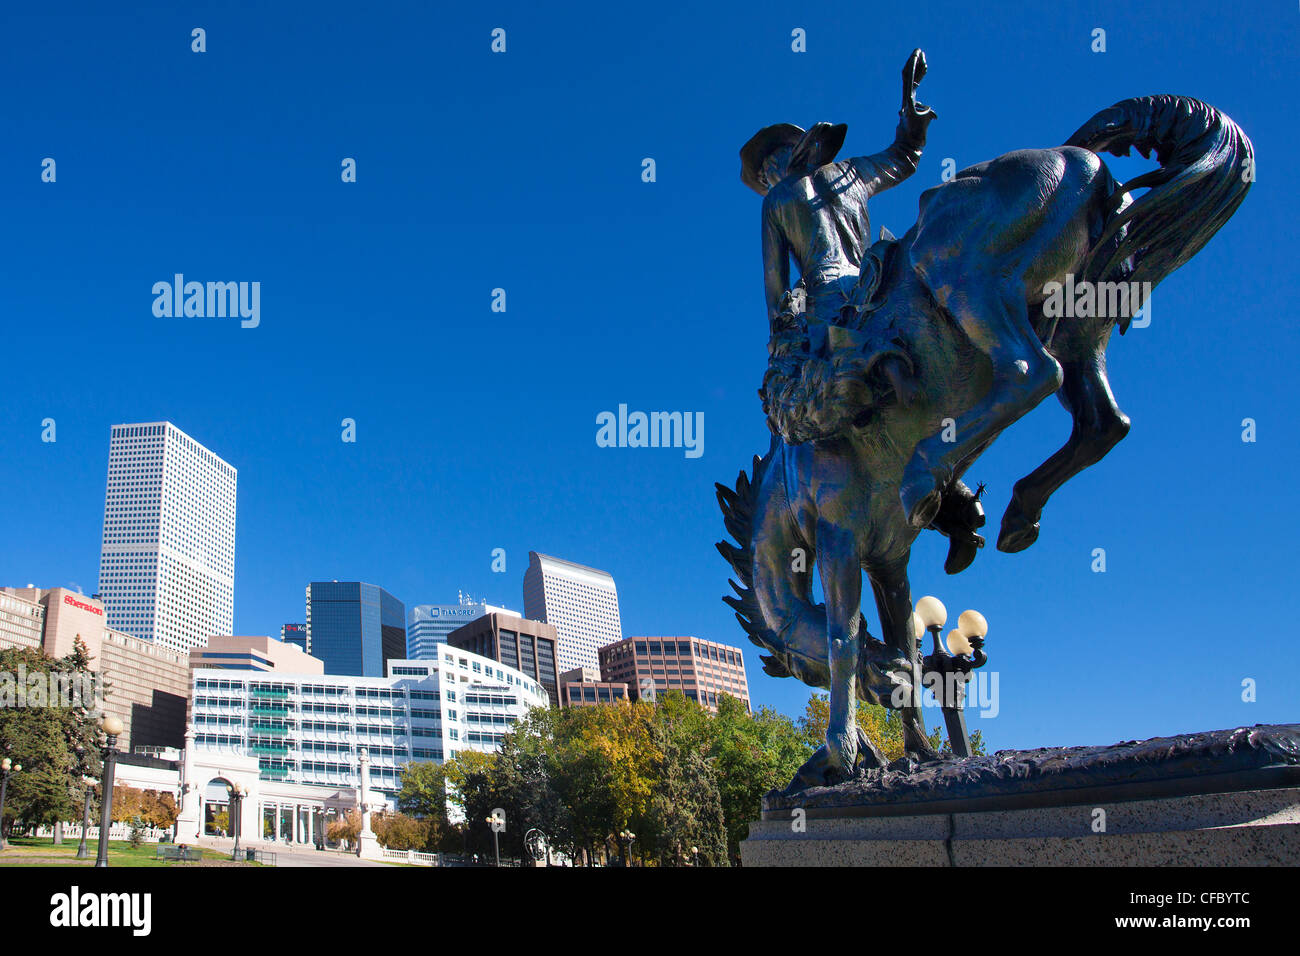 USA, United States, America, Colorado, Denver, City, Bronco Buster, Sculpture, Civic Park, Downtown, blue, bronze, clear, downto Stock Photo